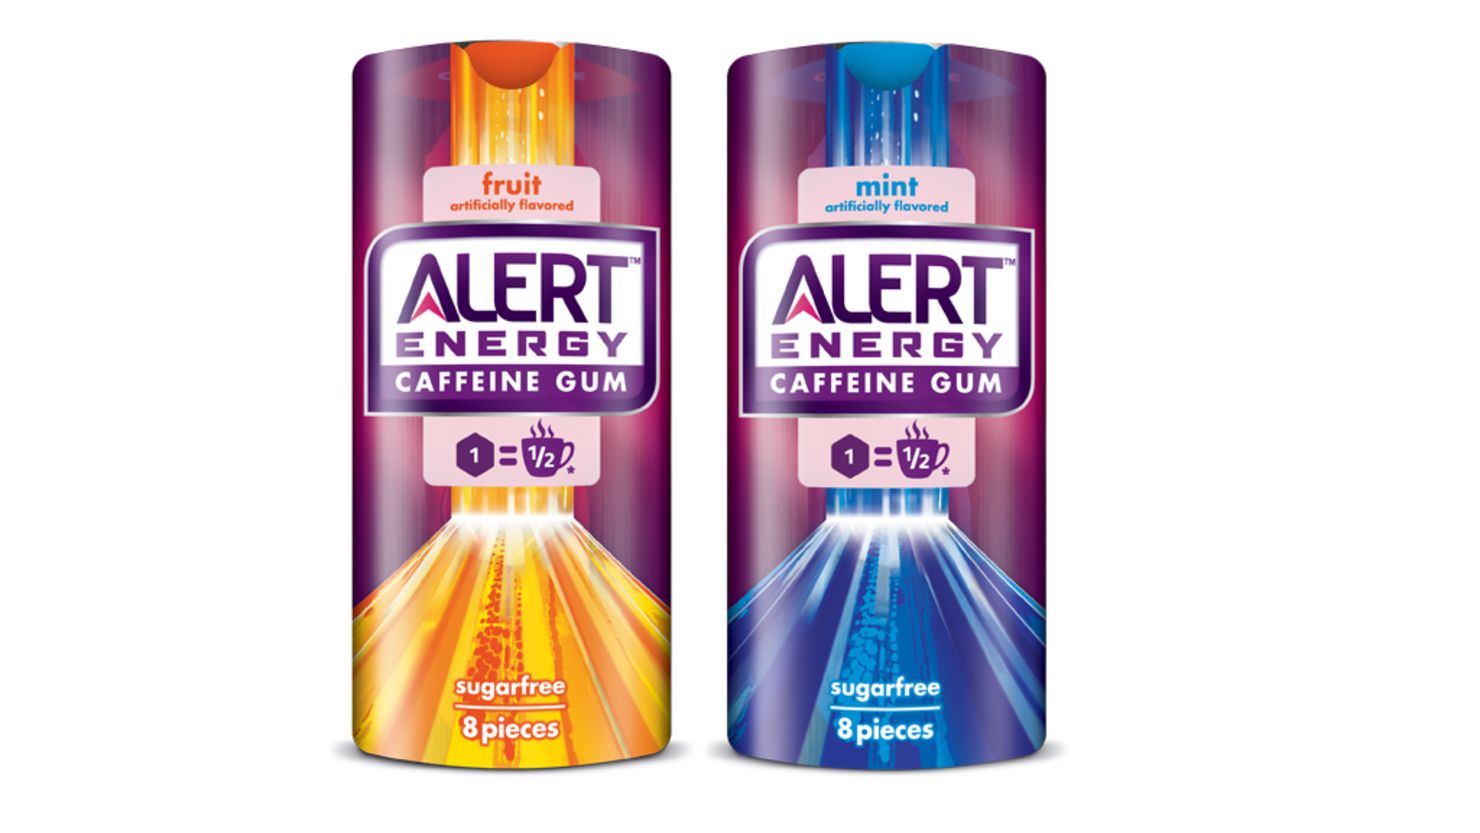 Alert Energy Caffeine Gum comes in two flavors: mint and fruit.